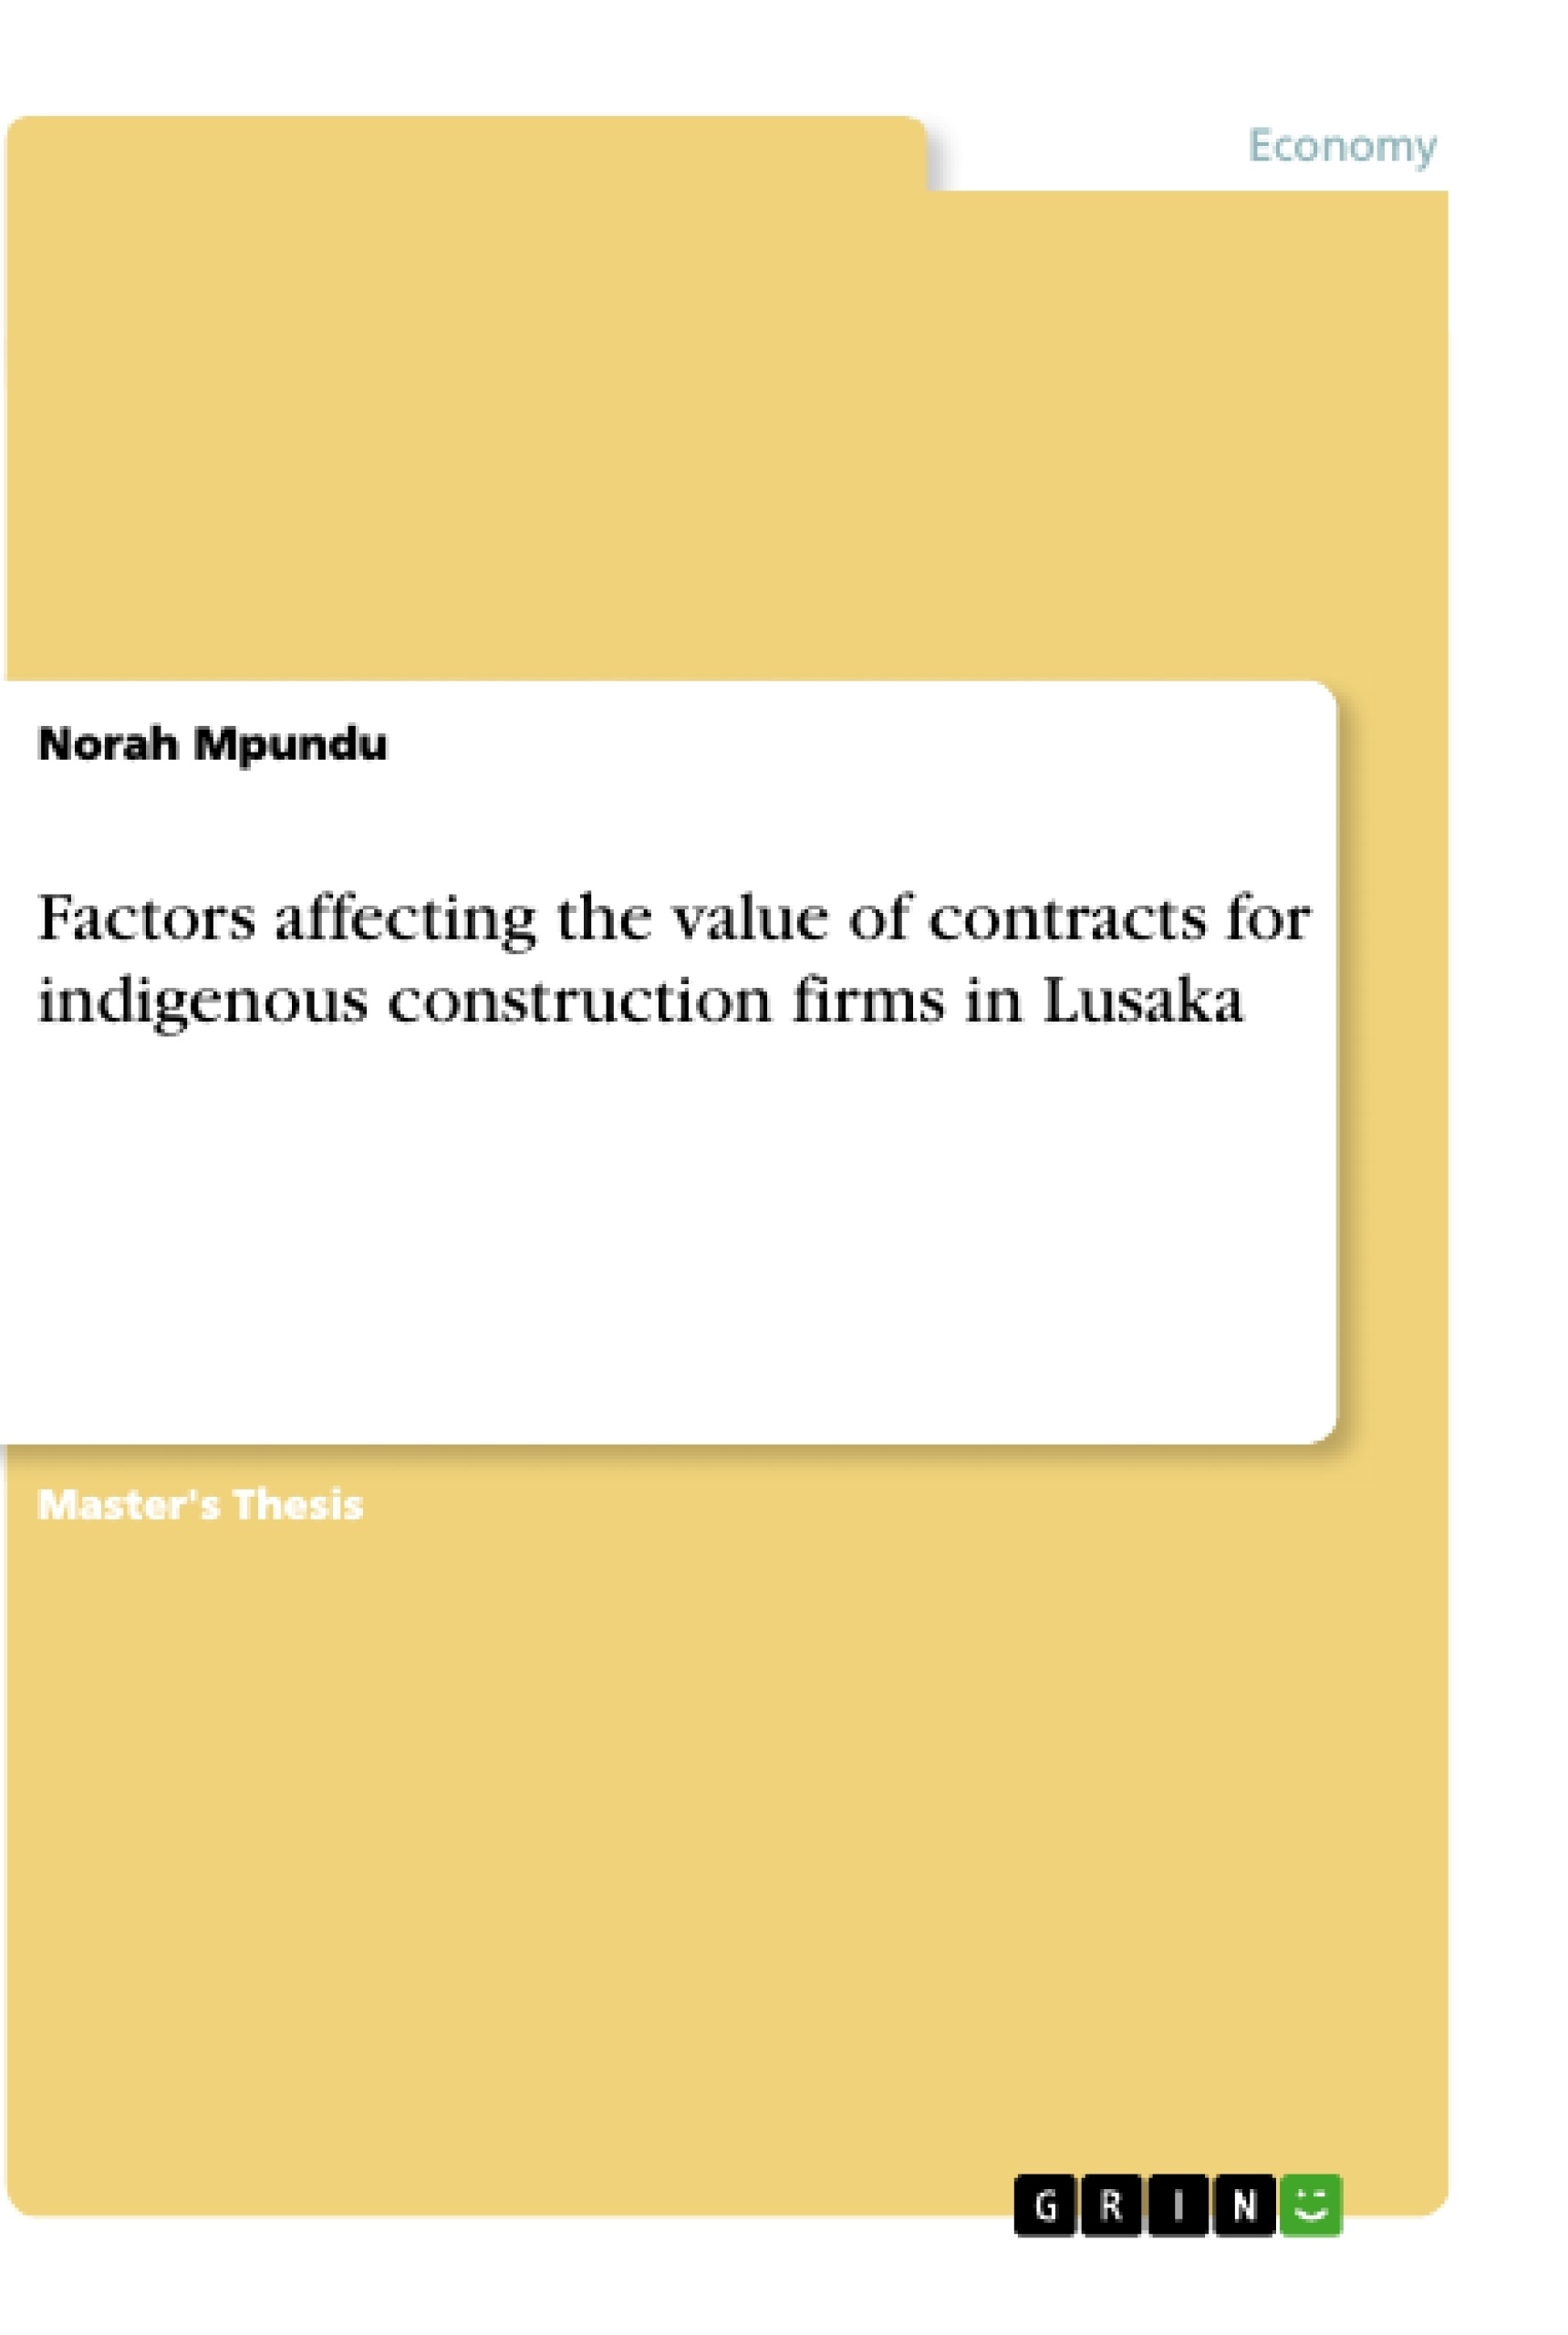 Titre: Factors affecting the value of contracts for indigenous construction firms in Lusaka